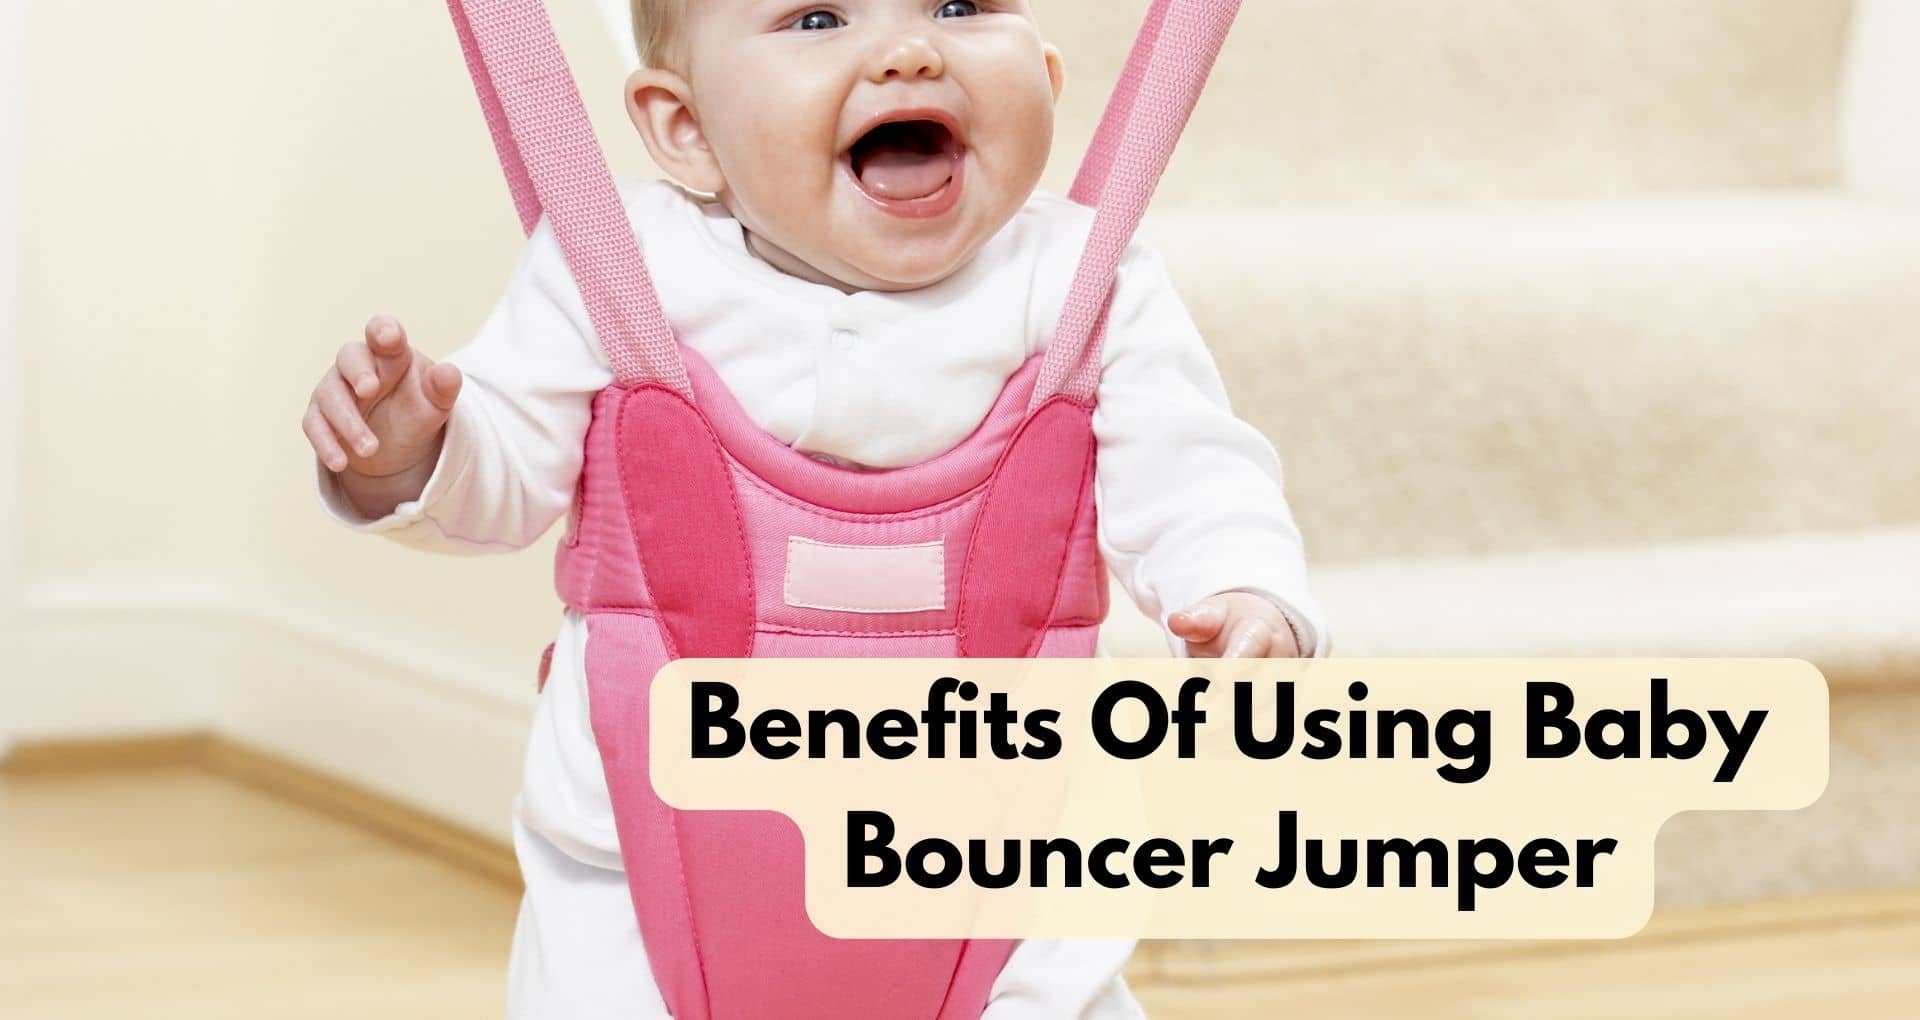 What Are The Benefits Of Using Baby Bouncer Jumper?